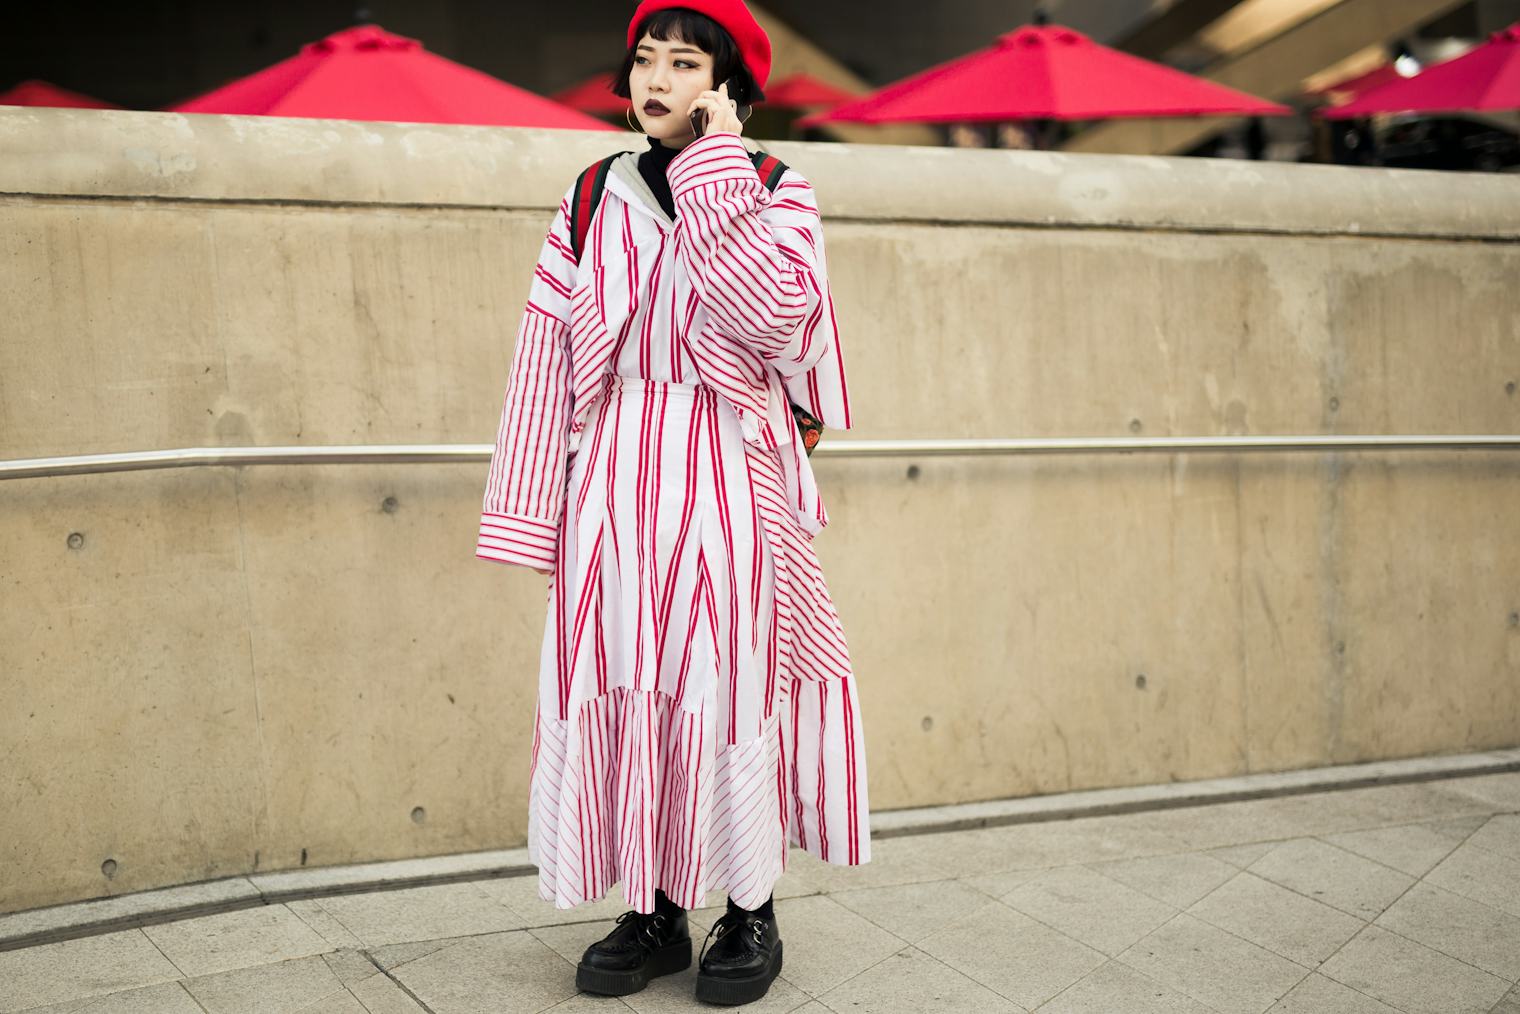 42 Seoul Fashion Week Street Style Pics That Go The Distance